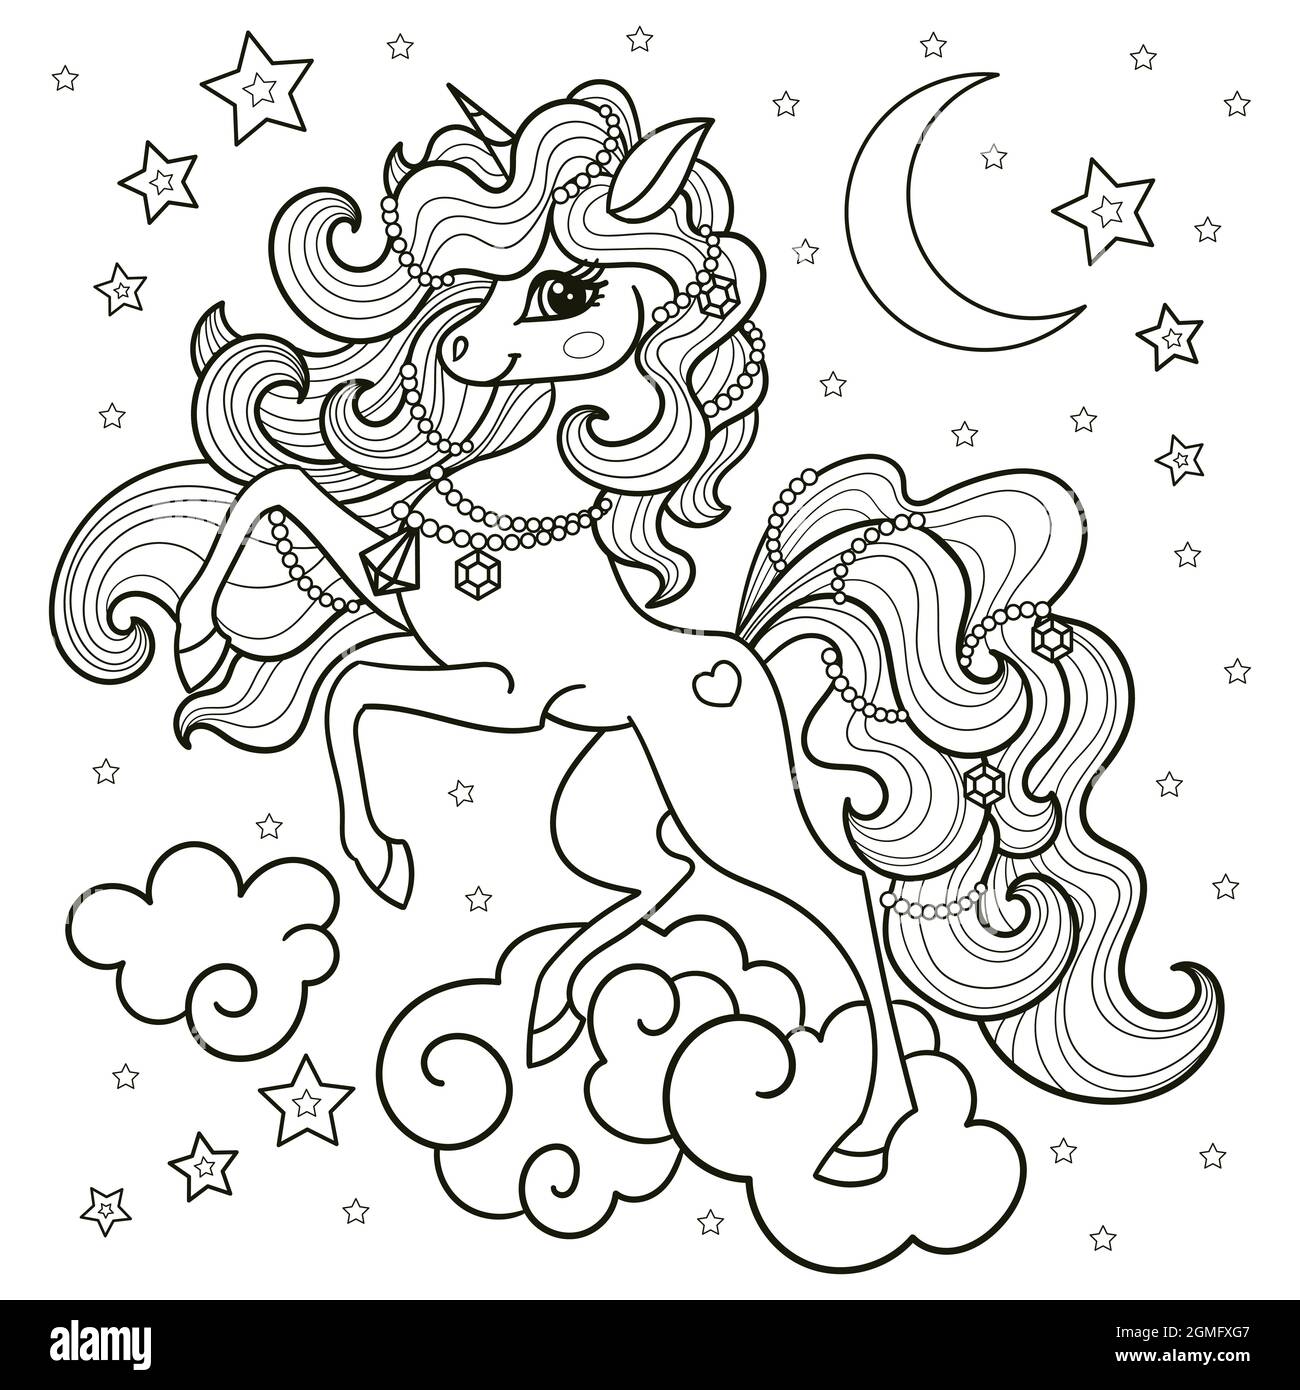 How To Draw a Unicorn: 10 Easy Drawing Projects